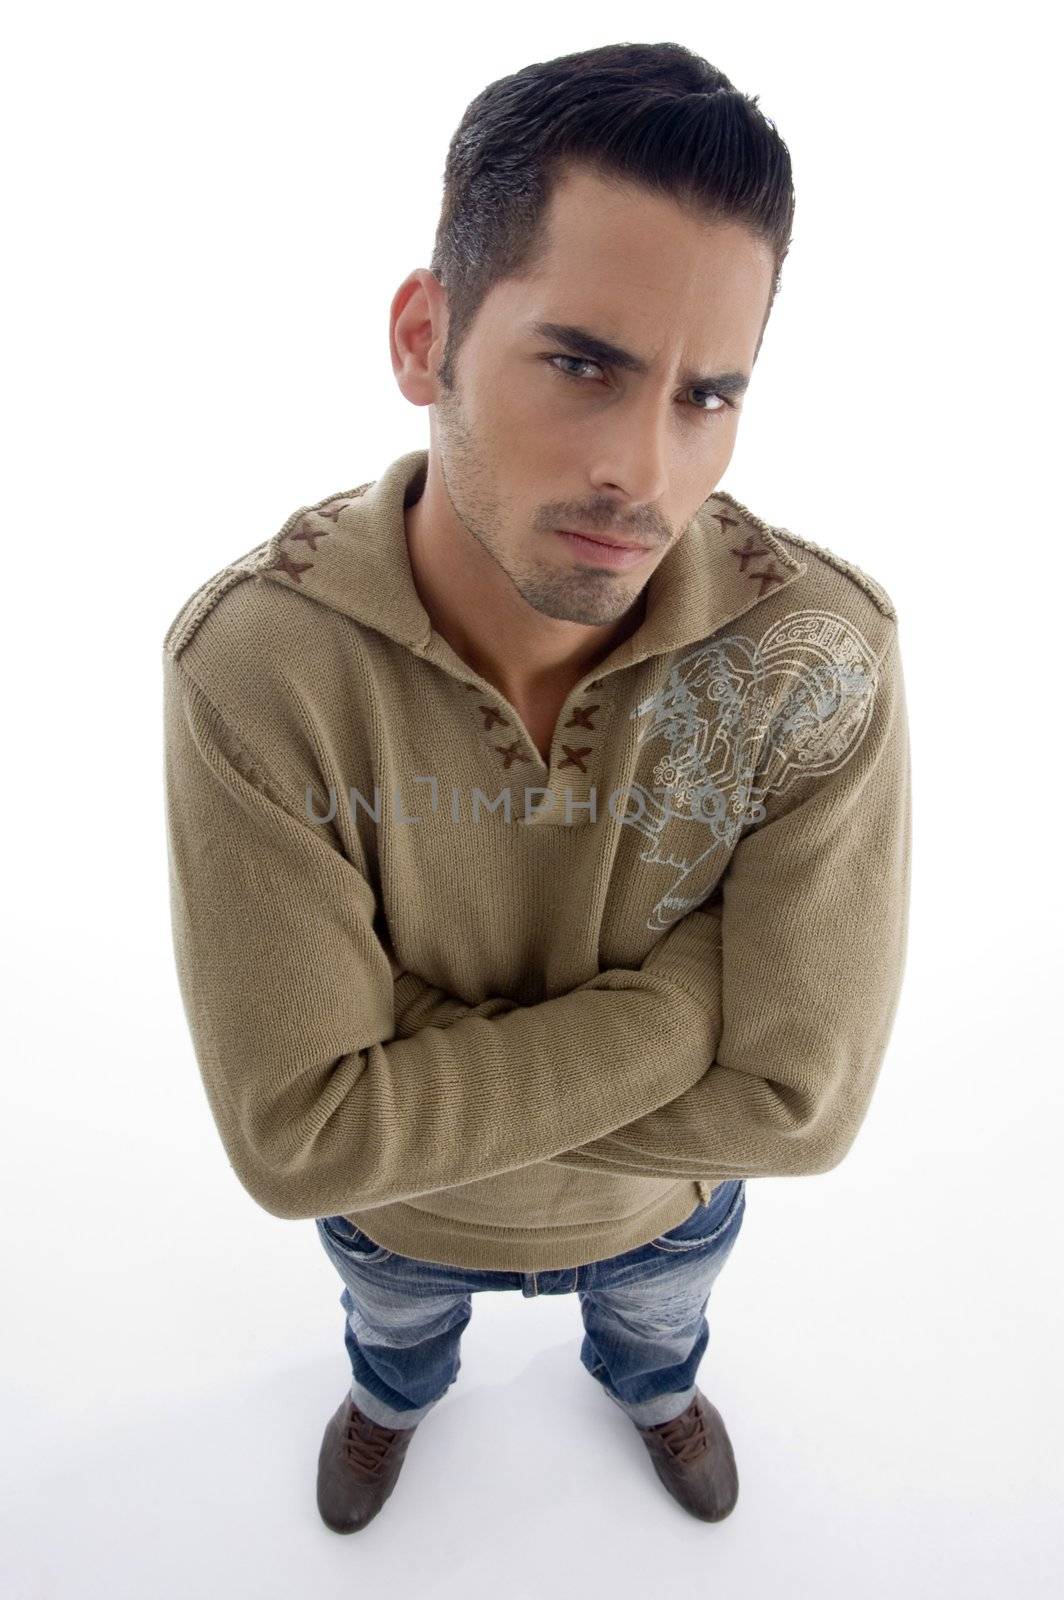 full pose of male model looking at camera against white background